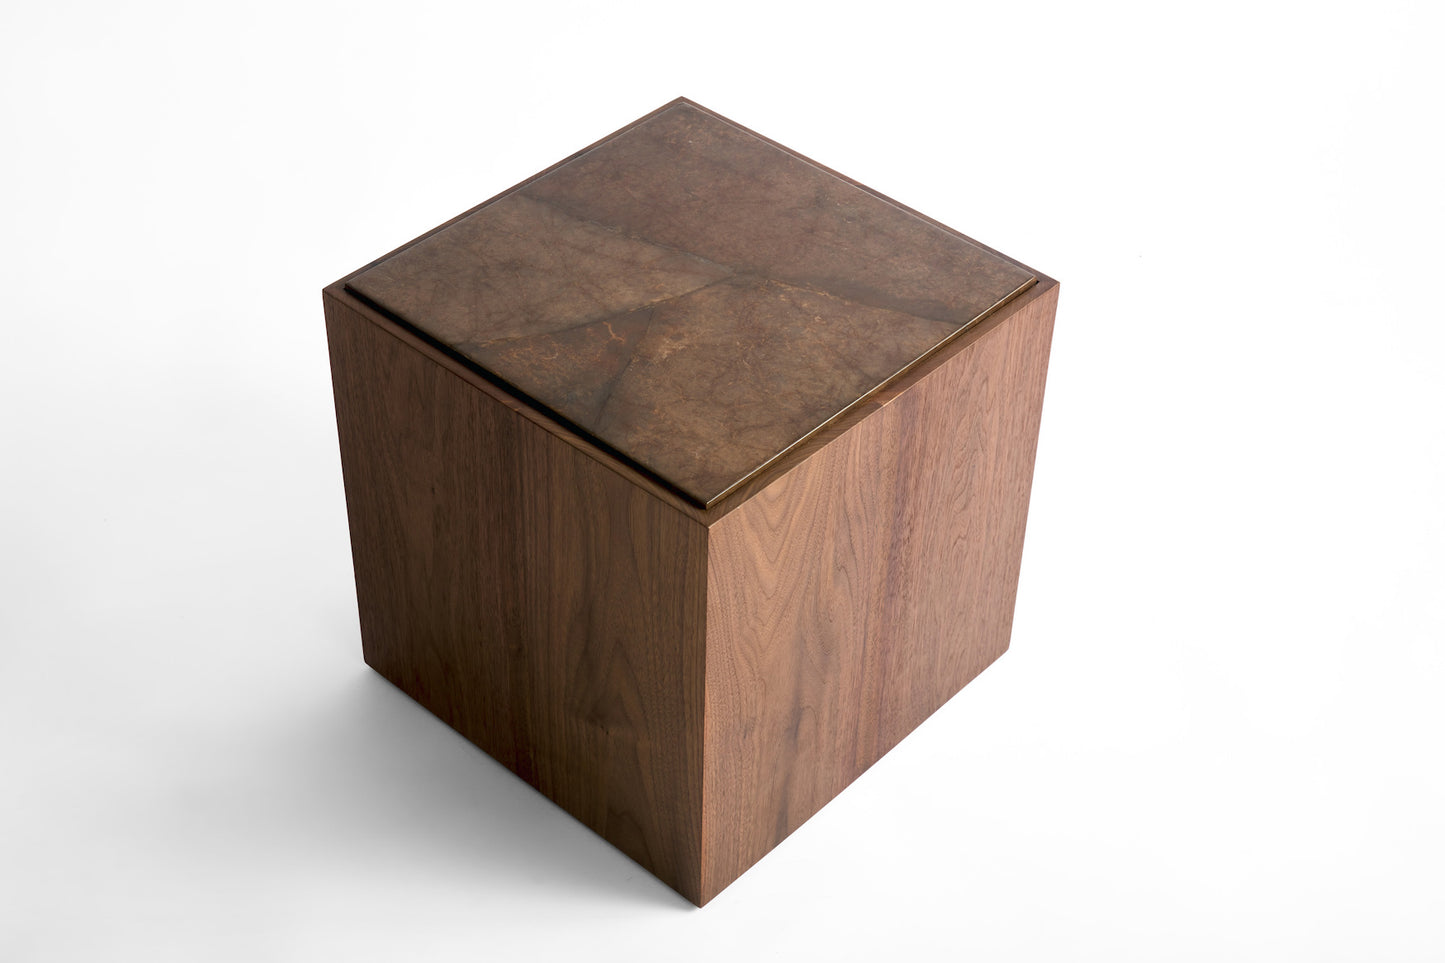 Shown in Natural Walnut base with Chocolate Ripped Parchment top